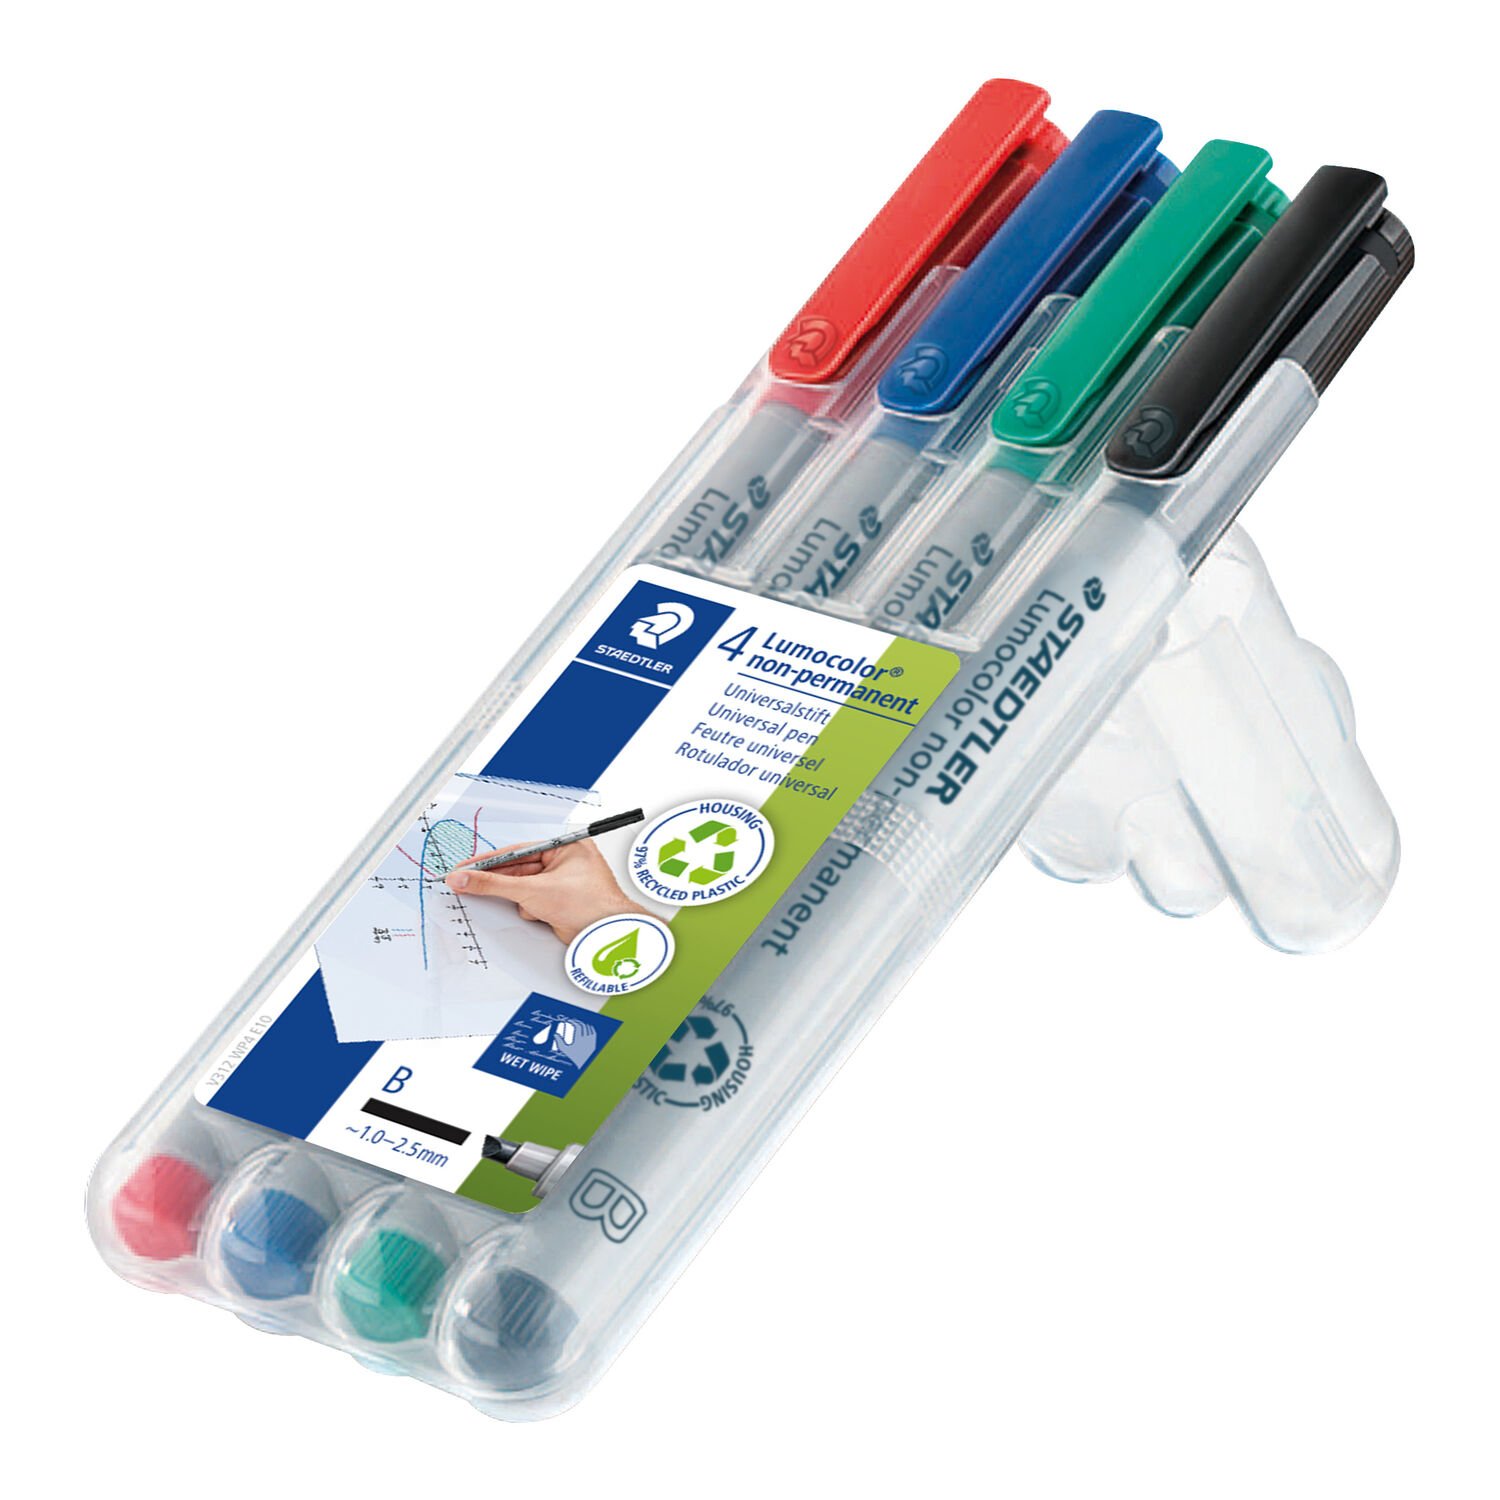 STAEDTLER box containing 4 Lumocolor non-permanent in assorted colours